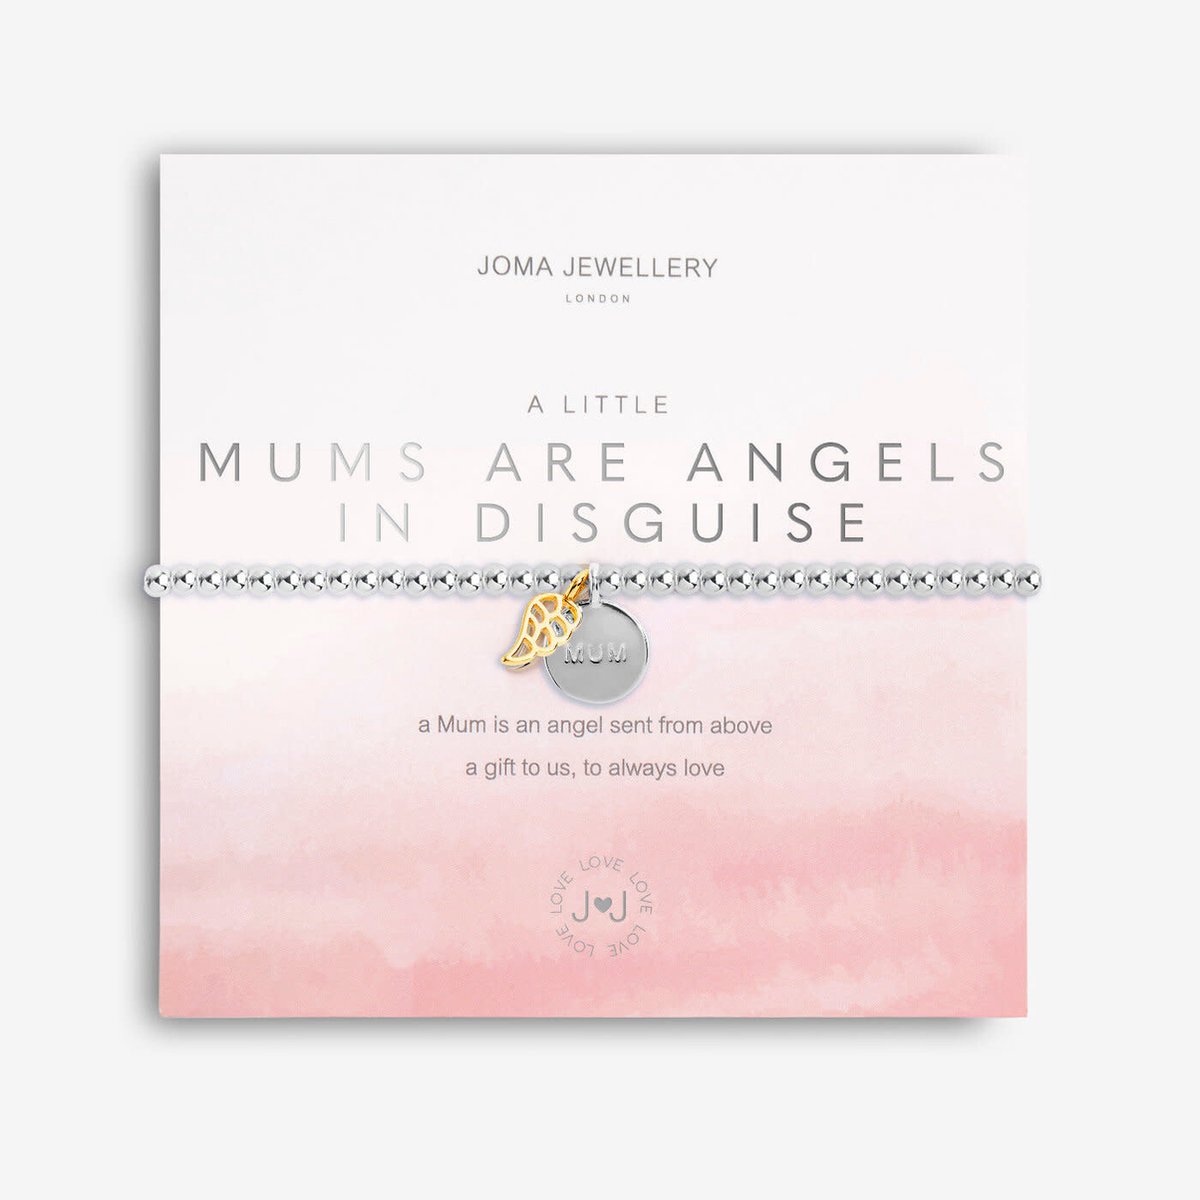 Joma Jewellery - A Little - Mums are Angels - Armband